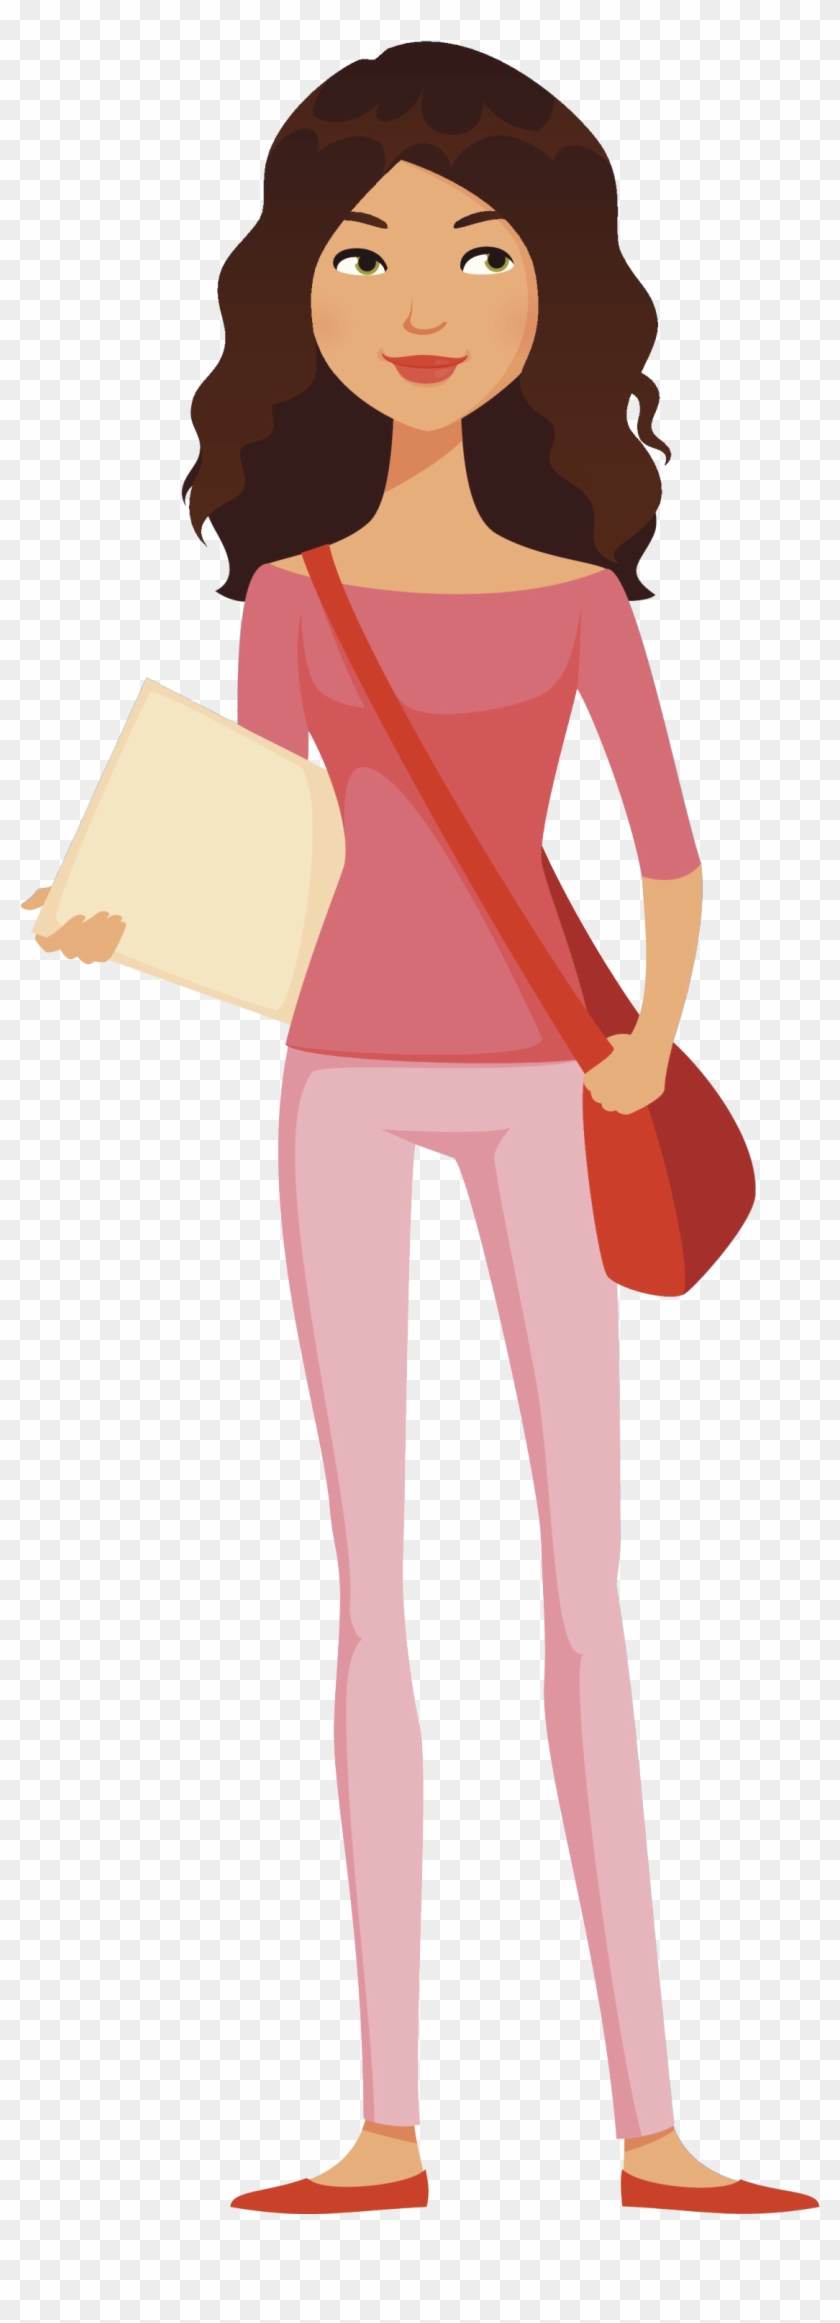 girl with school uniform clipart - Clip Art Library - Clip Art Library